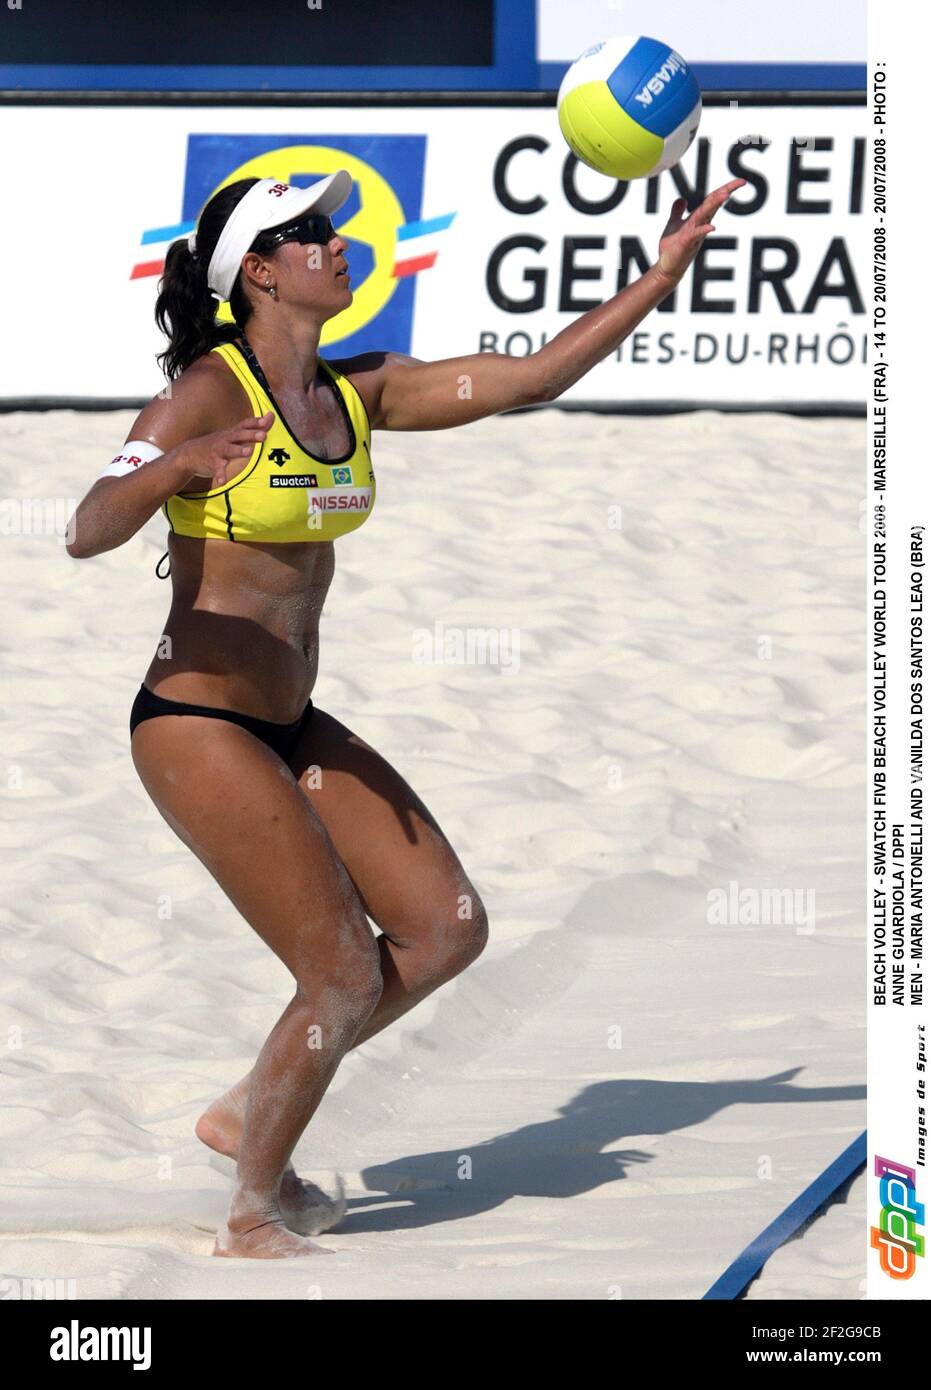 BEACH VOLLEY - SWATCH FIVB BEACH VOLLEY WORLD TOUR 2008